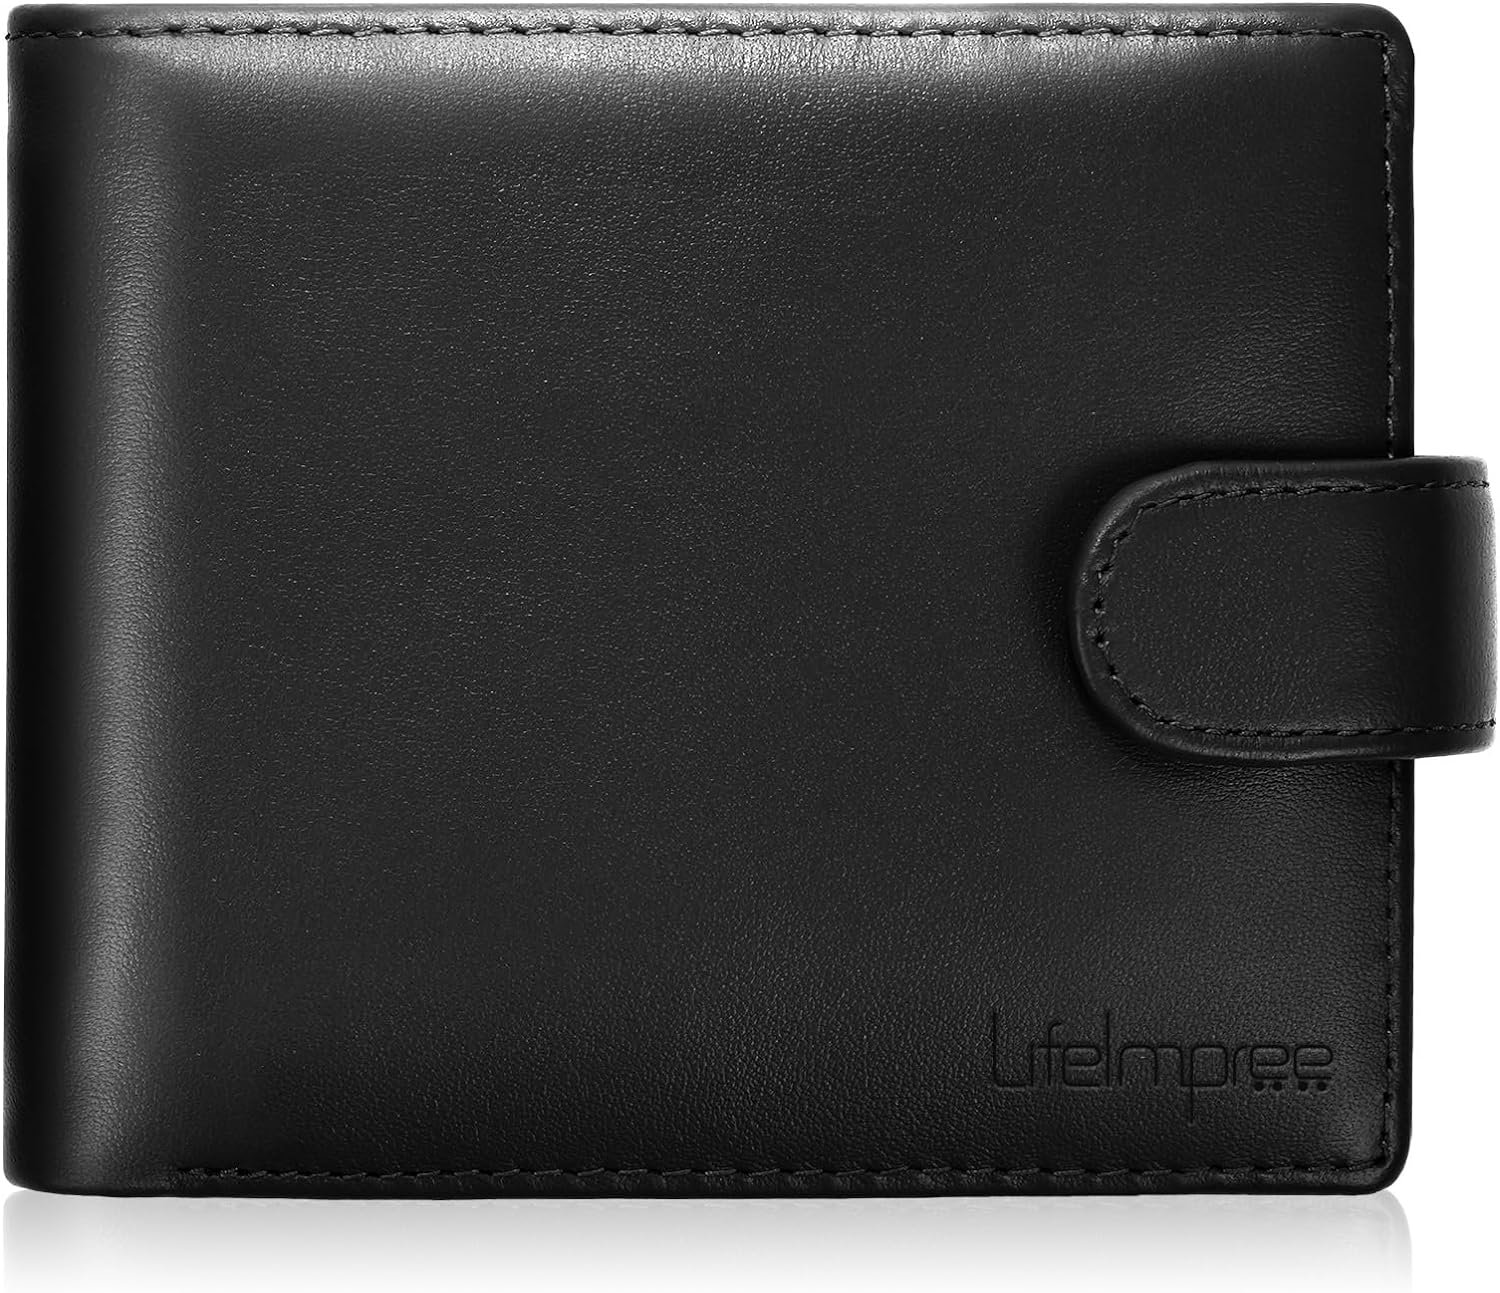 LifeImpree Genuine Leather Bifold Mens Wallet with Coin Pocket Review